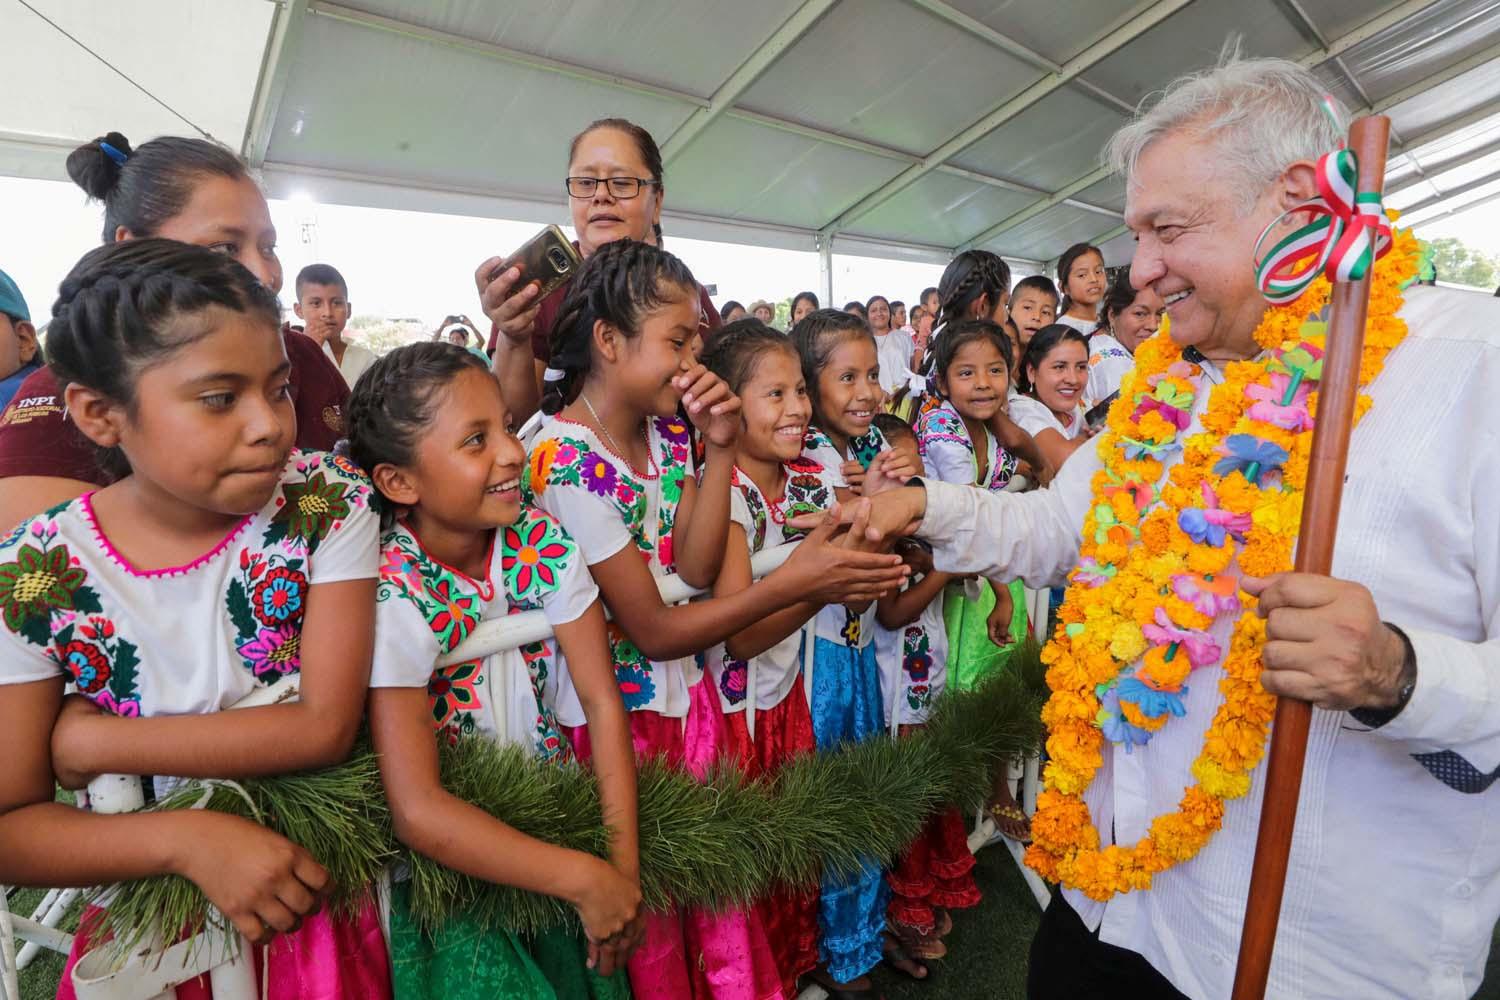 Mexico's President Andres Manuel Lopez Obrador shakes hands with girls while visiting towns in the southwestern state of Guerrero, as Mexico's health ministry urged people to mantain a 